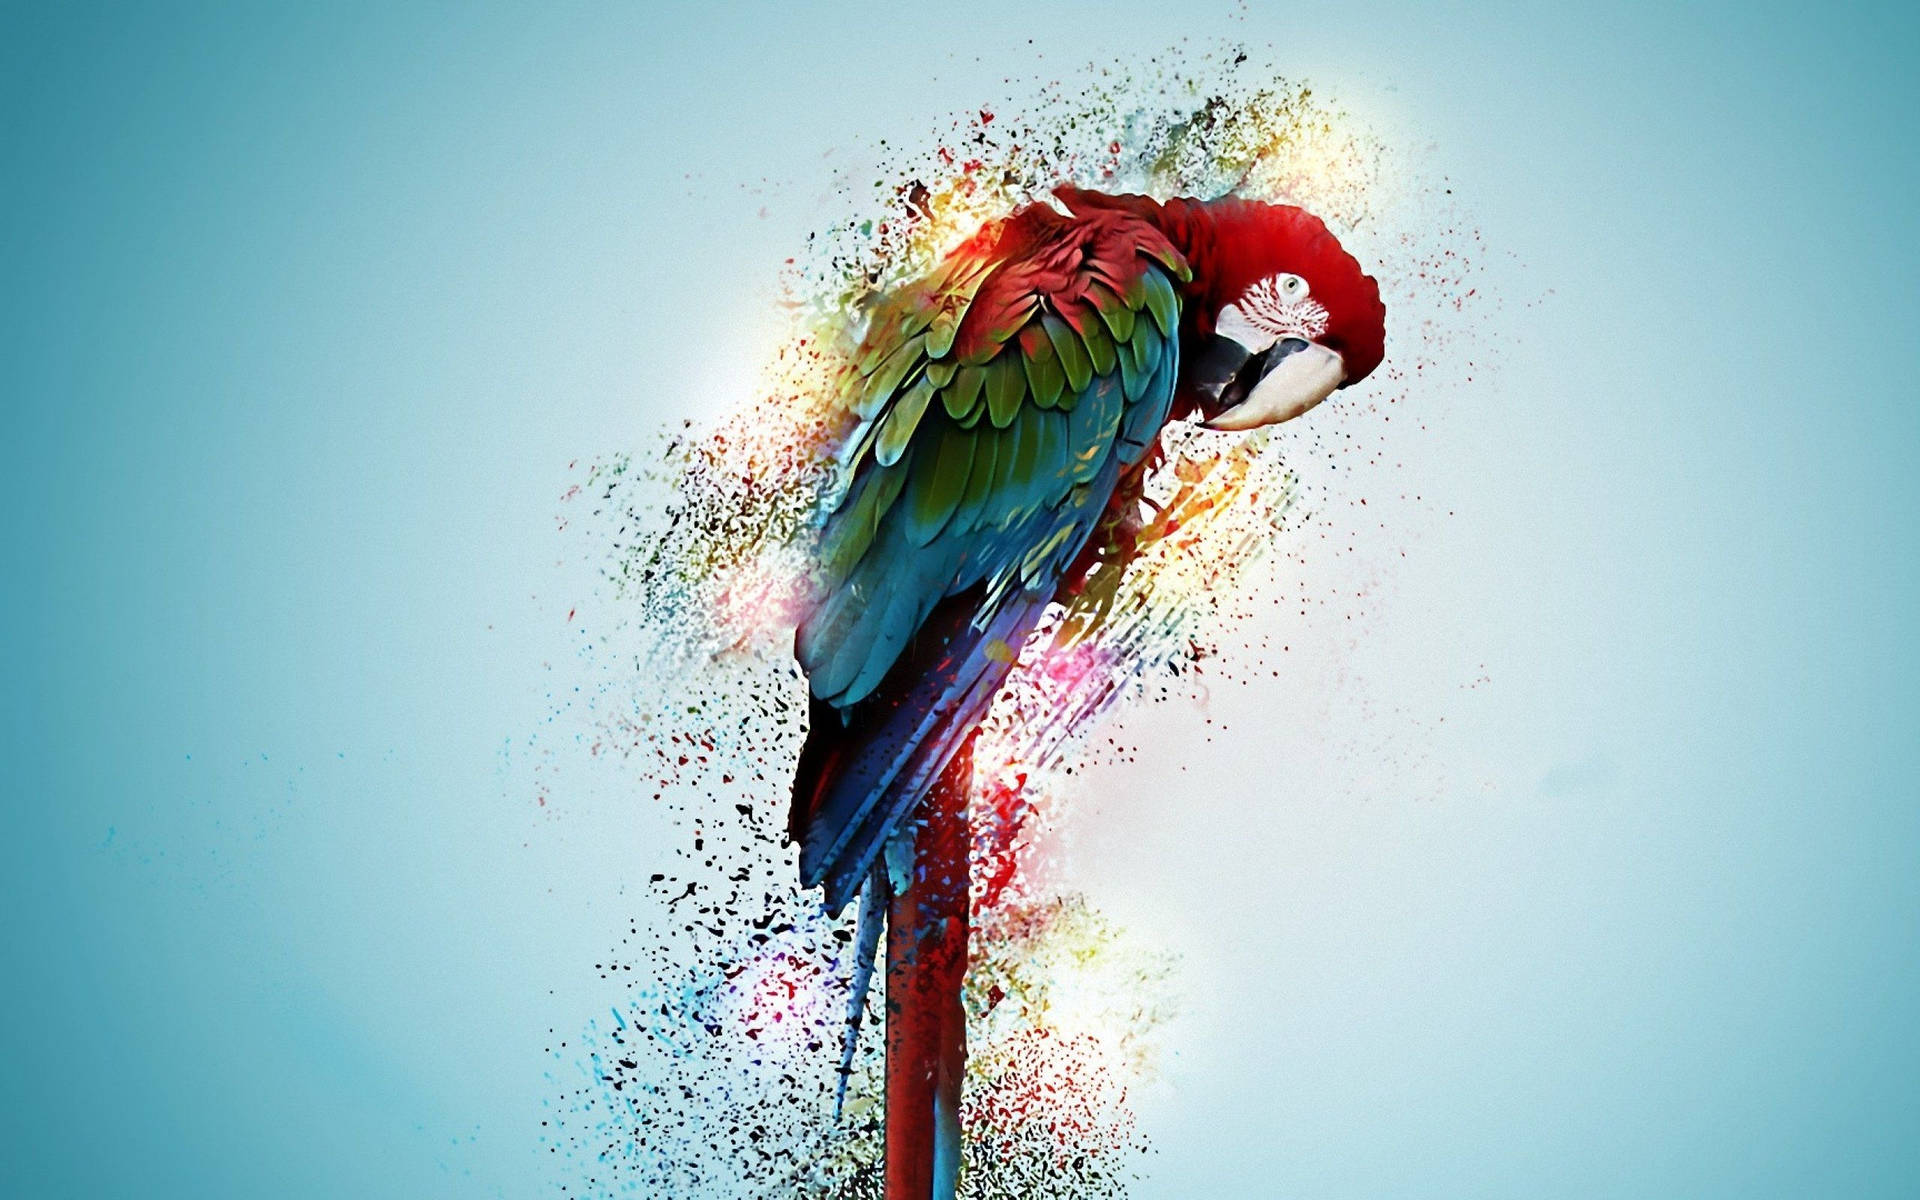 Psychedelic Art of colorful parrot fading away with glowing splashes of paint.